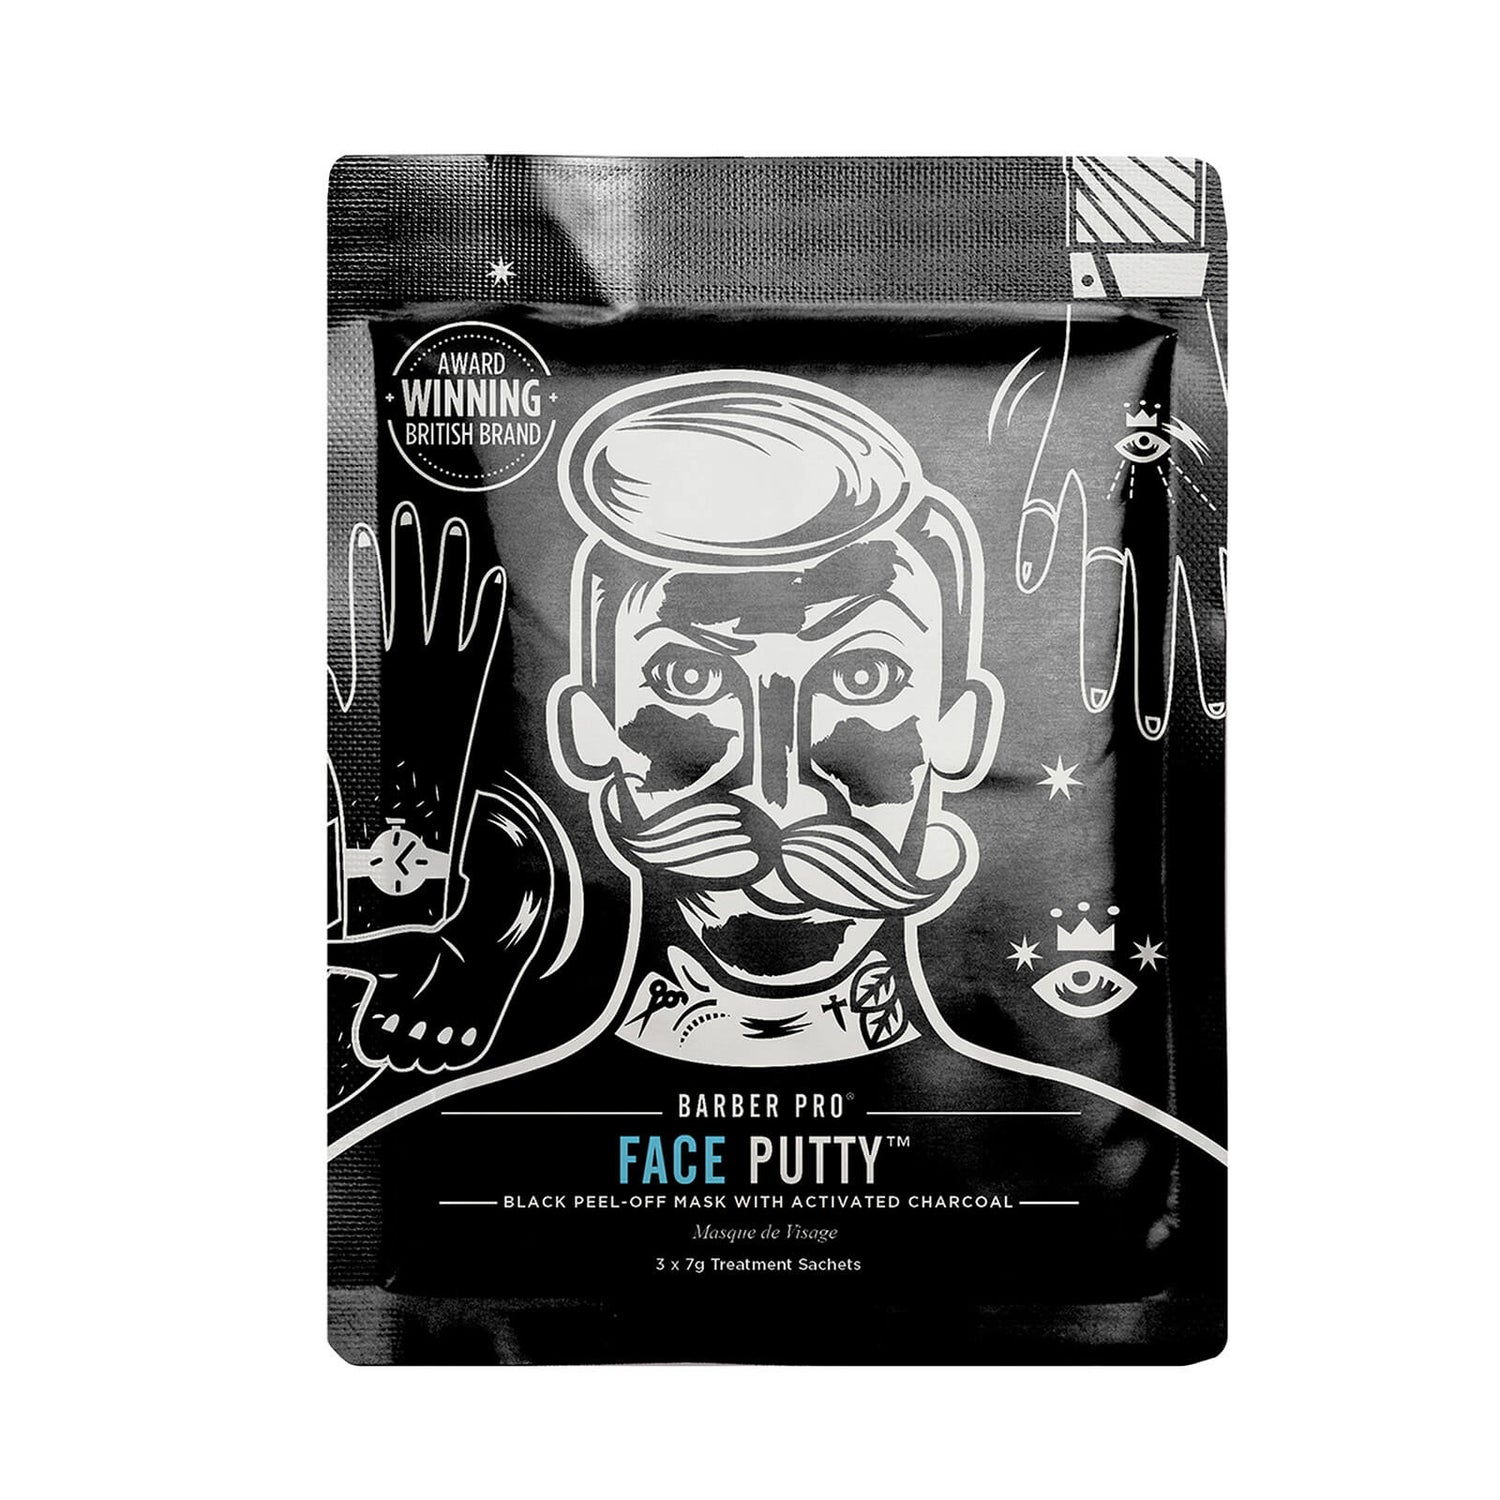 BARBER PRO Face Putty Black Peel-Off Mask with Activated Charcoal (3 εφαρμογές)